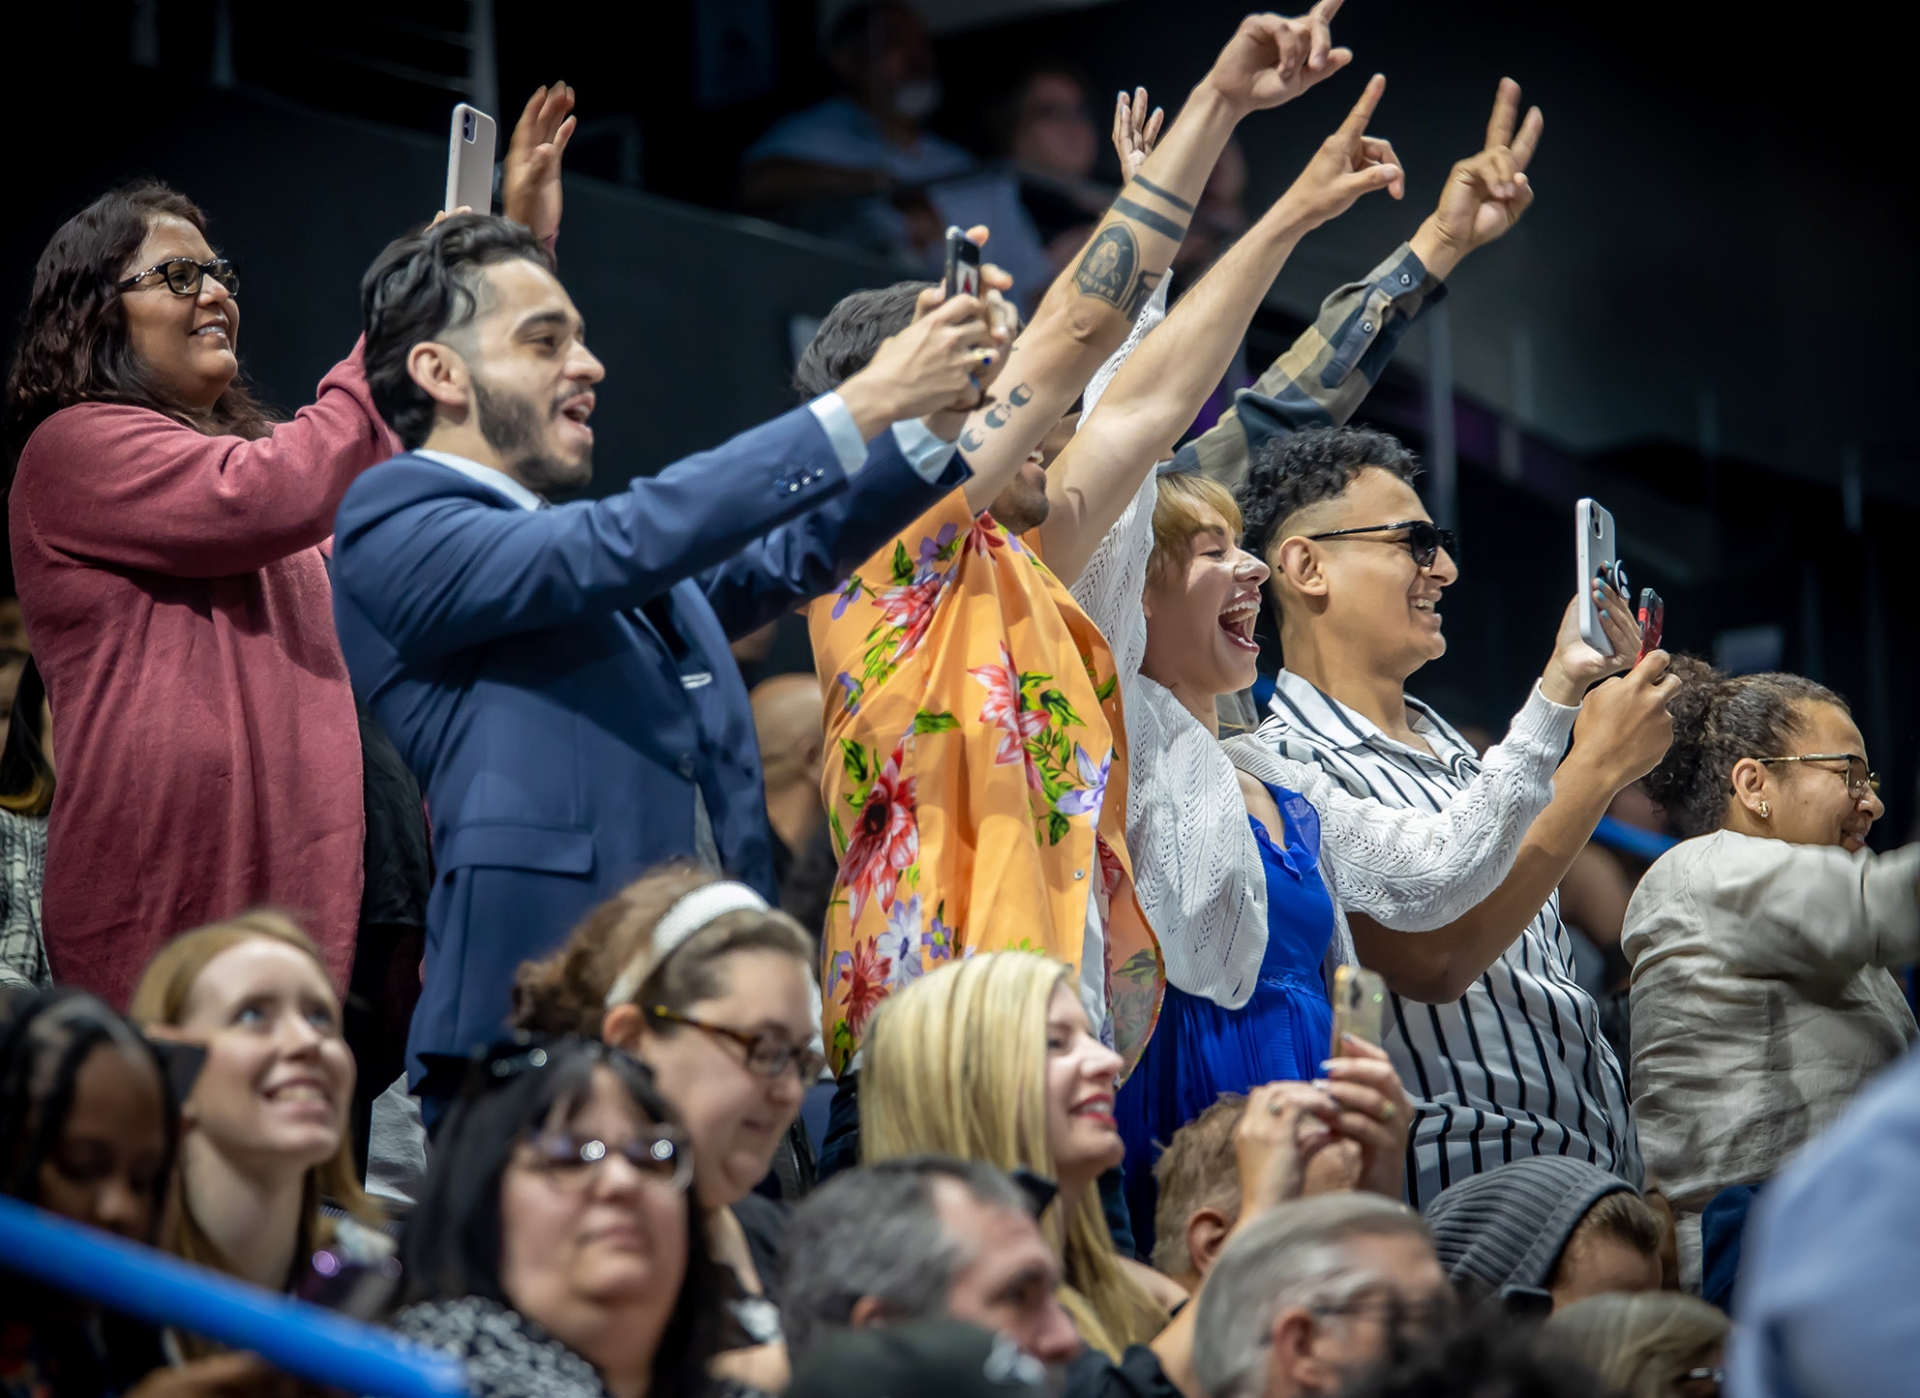 Family and friends celebrate from the stands, cheering on graduates from the College of Arts and Letters and James R. Watson & Judy Rodriguez Watson College of Education during their ceremony on May 20.